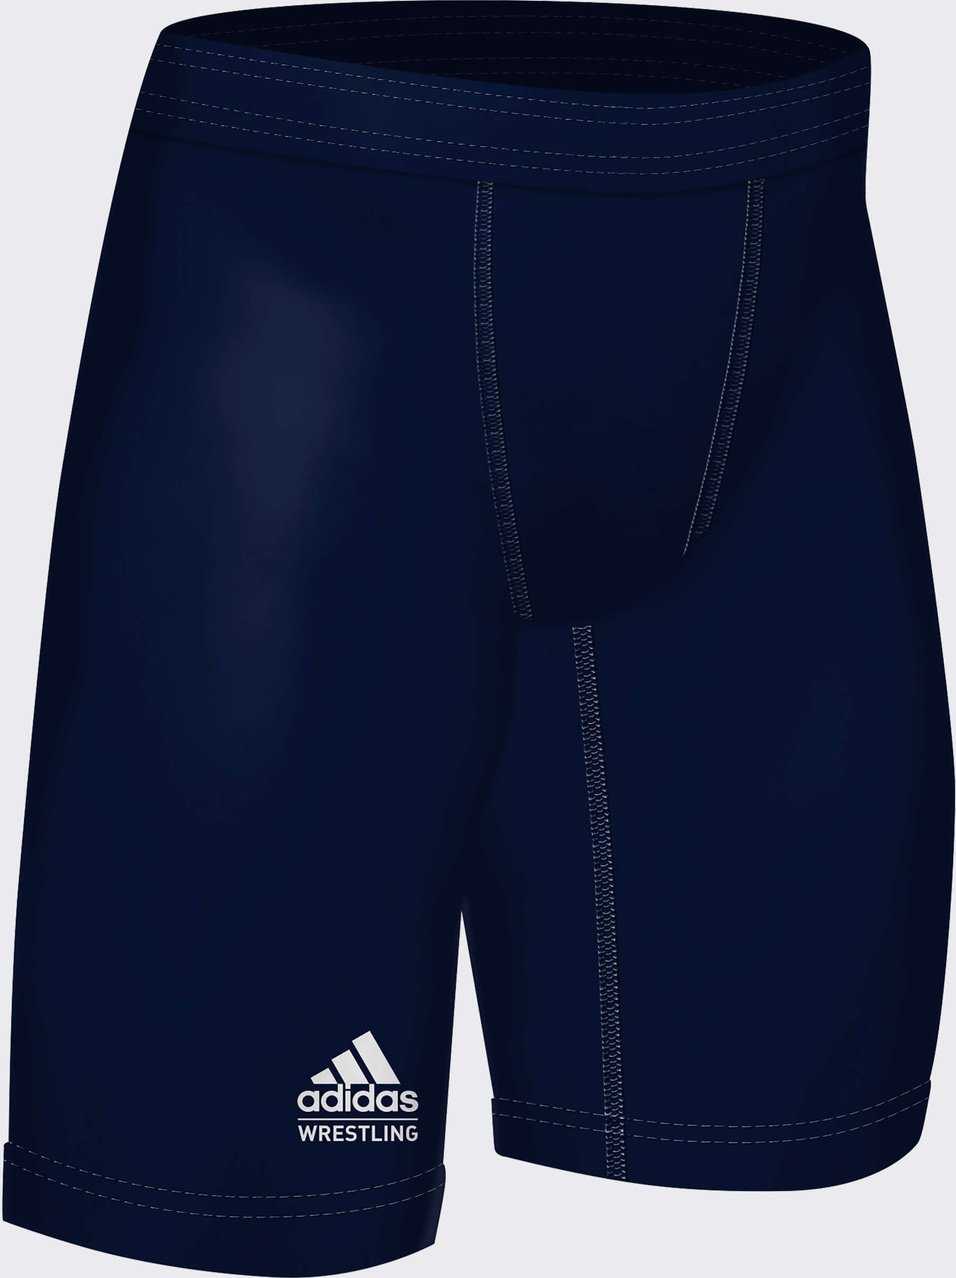 Adidas aA301s Compression Wrestling Shorts - Navy - HIT a Double